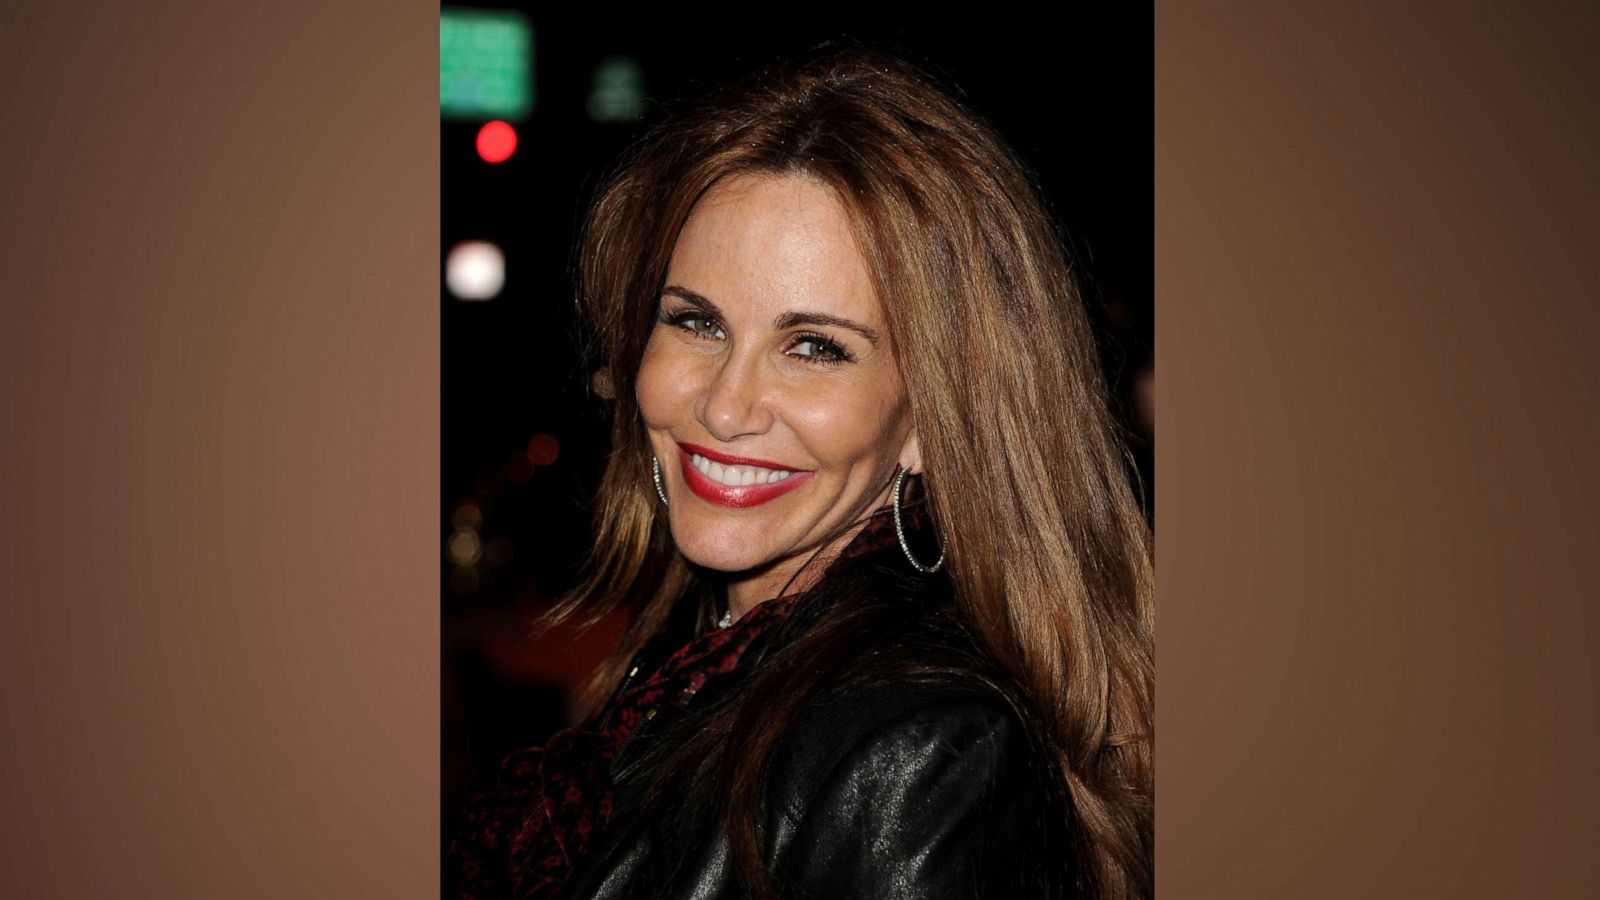 PHOTO: Tawny Kitaen arrives at the premiere of Relativity Media's "Take Me Home Tonight" at the Regal Cinemas L.A. Live Stadium 14 on March 2, 2011, in Los Angeles